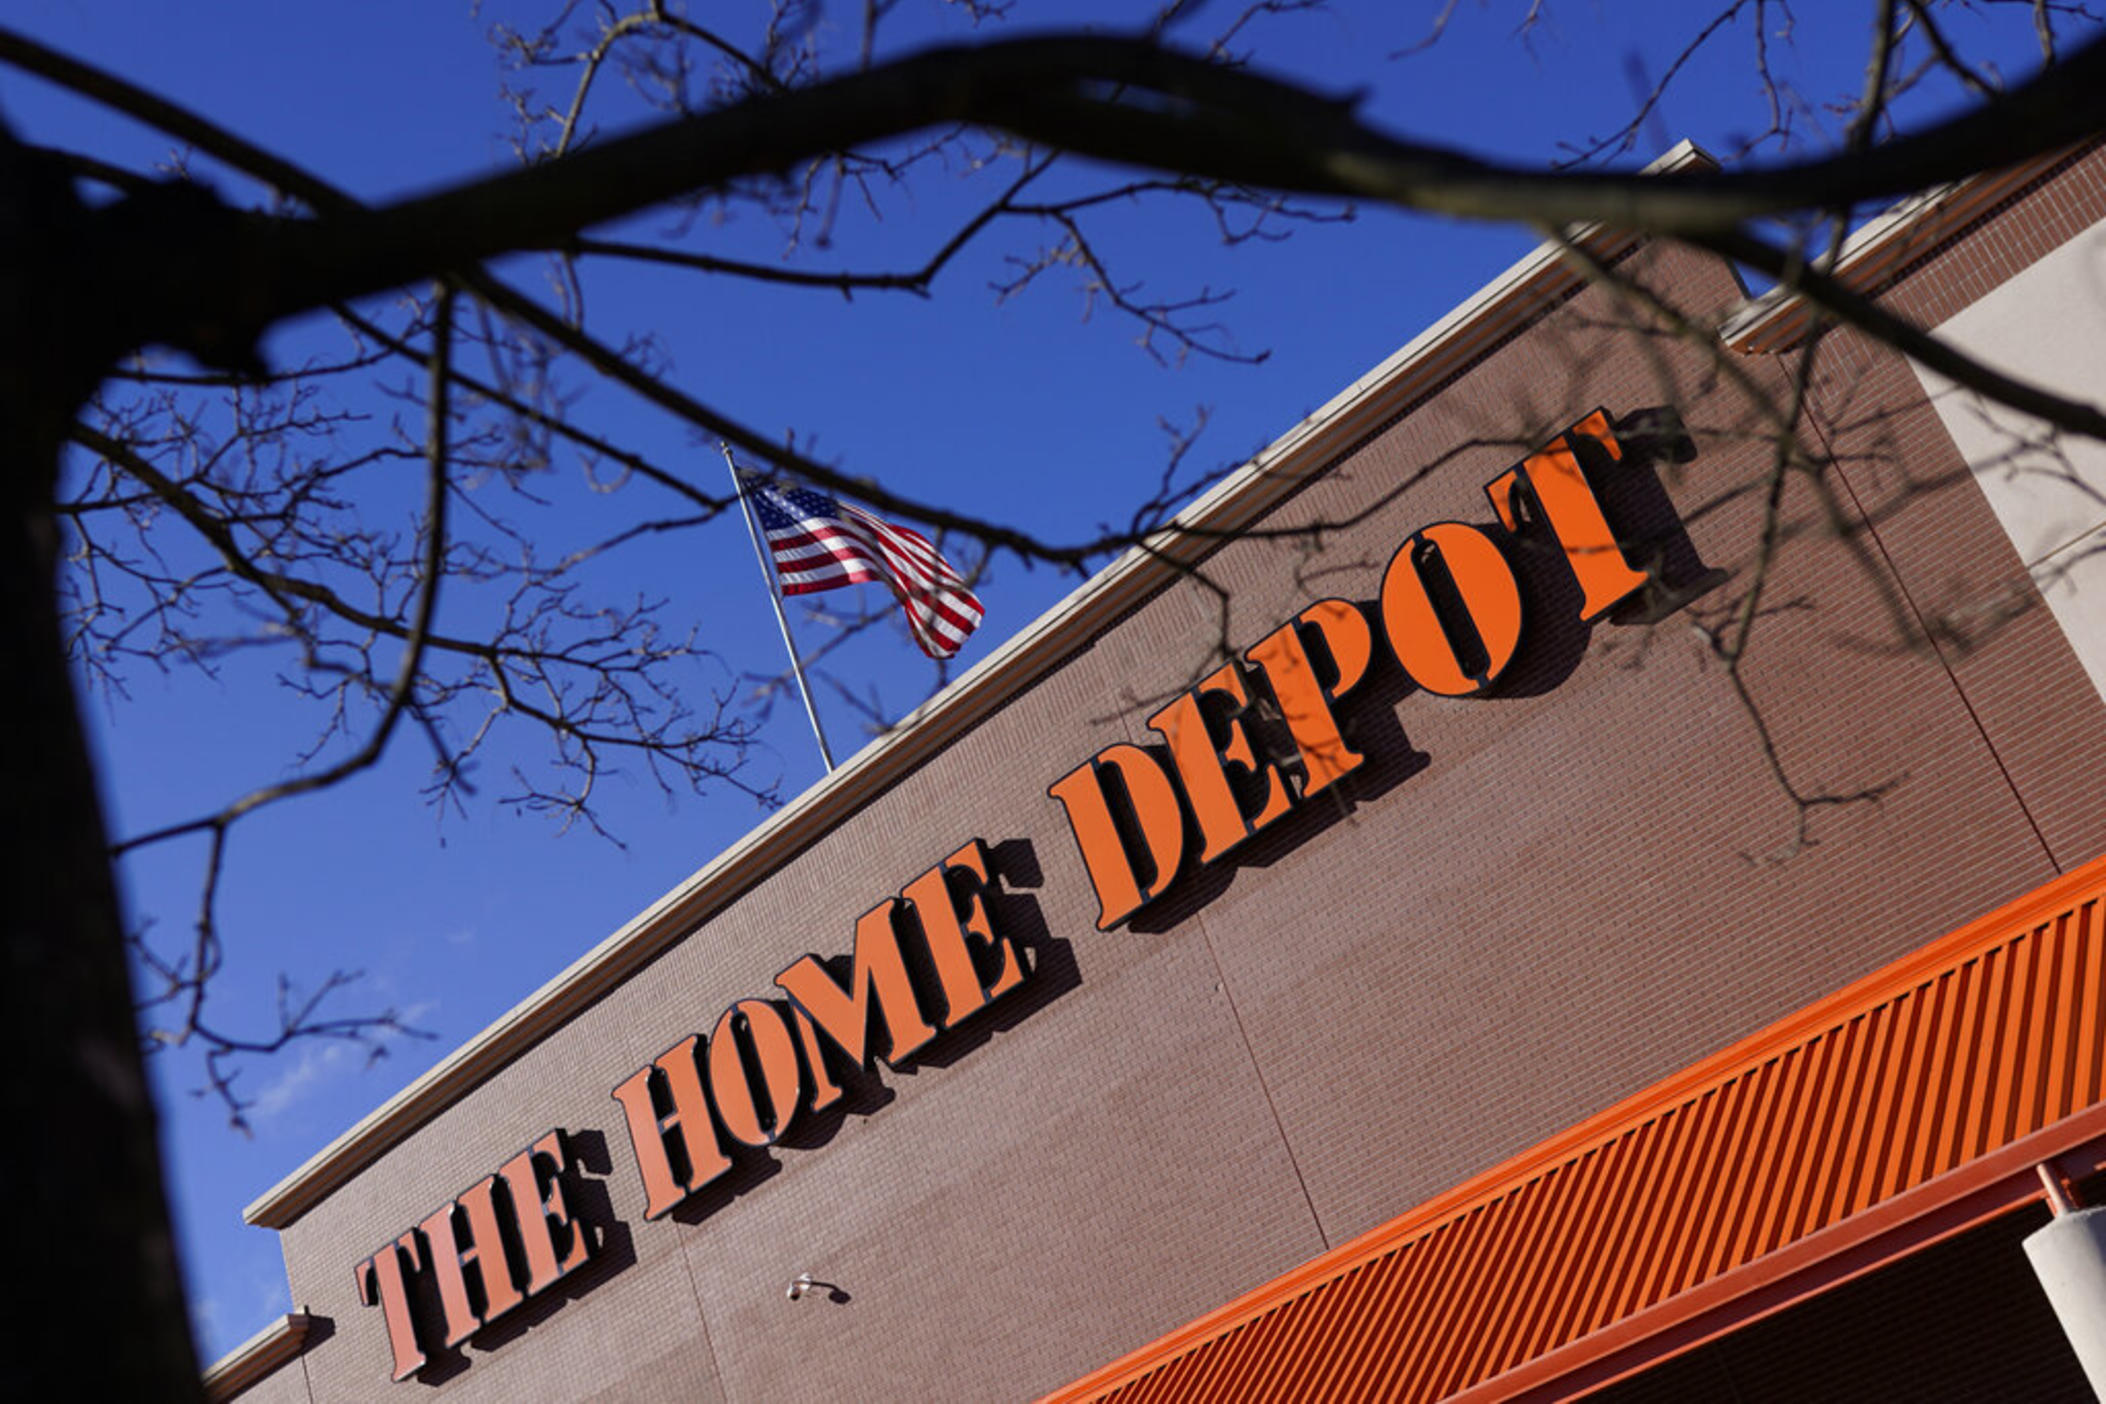 The Home Depot store is seen on Monday, Feb. 22, 2021, in Cornelius, N.C.